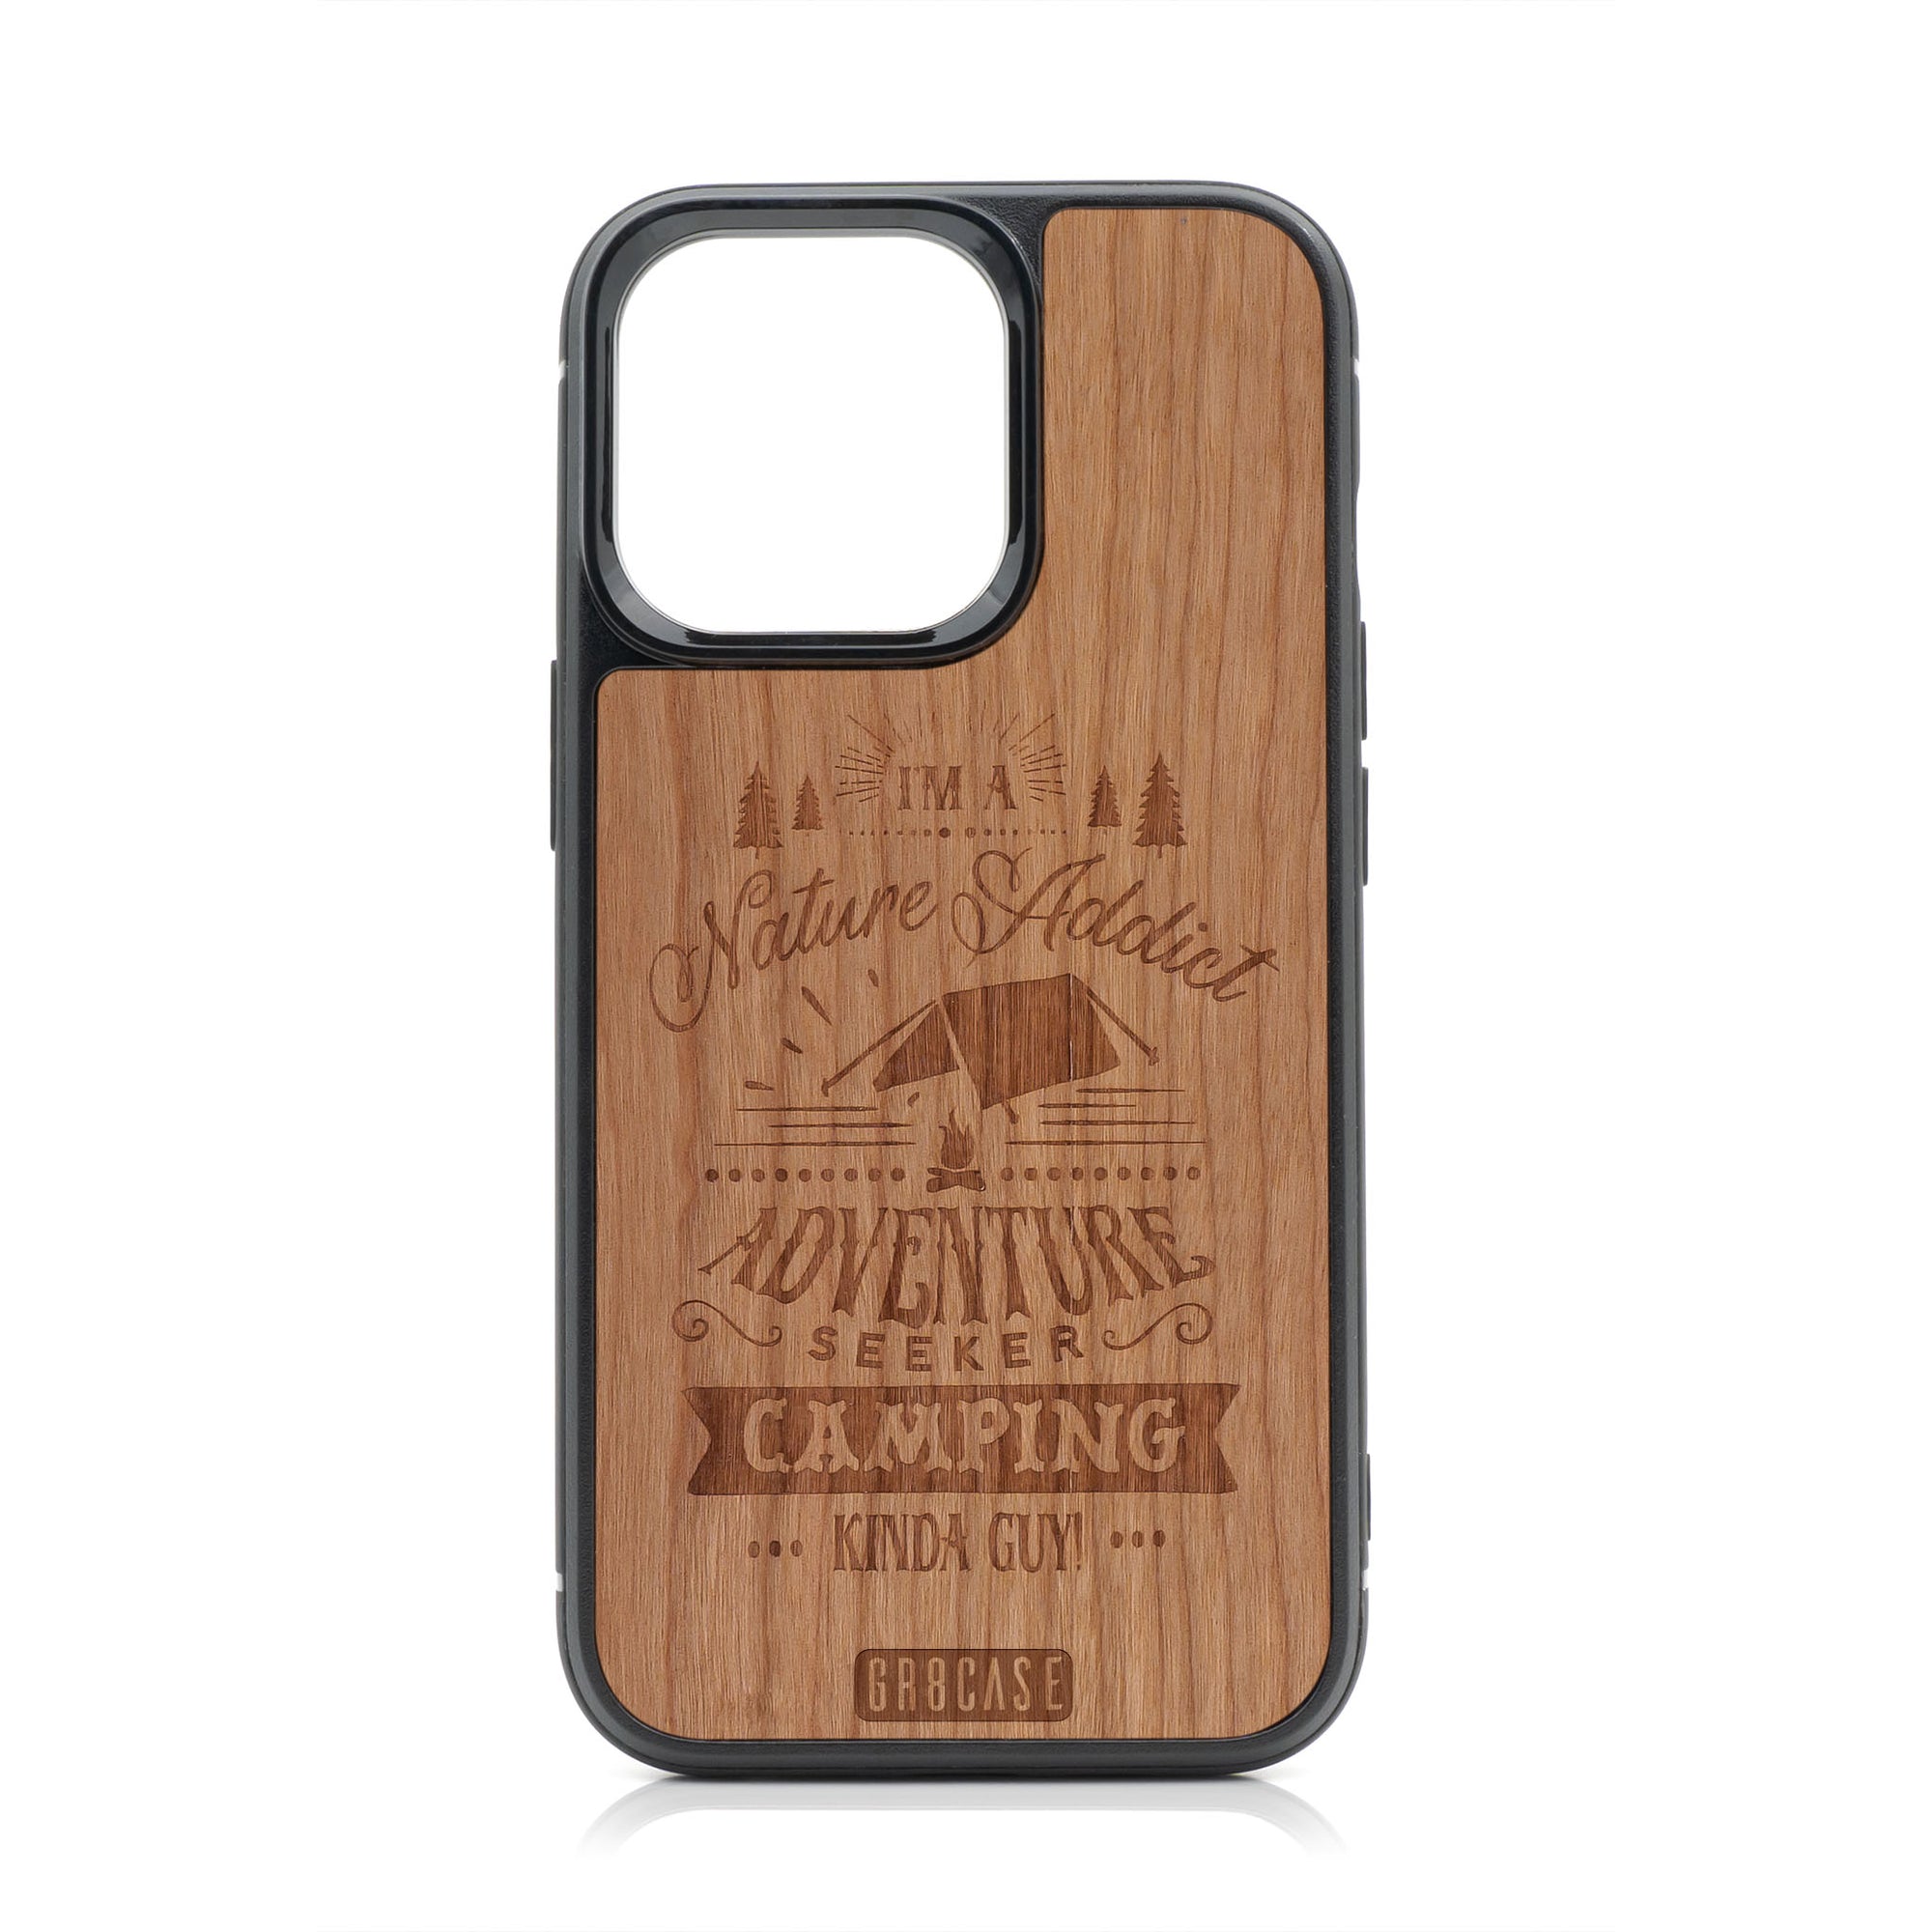 I'm A Nature Addict Adventure Seeker Camping Kinda Guy Design Wood Case For iPhone 13 Pro